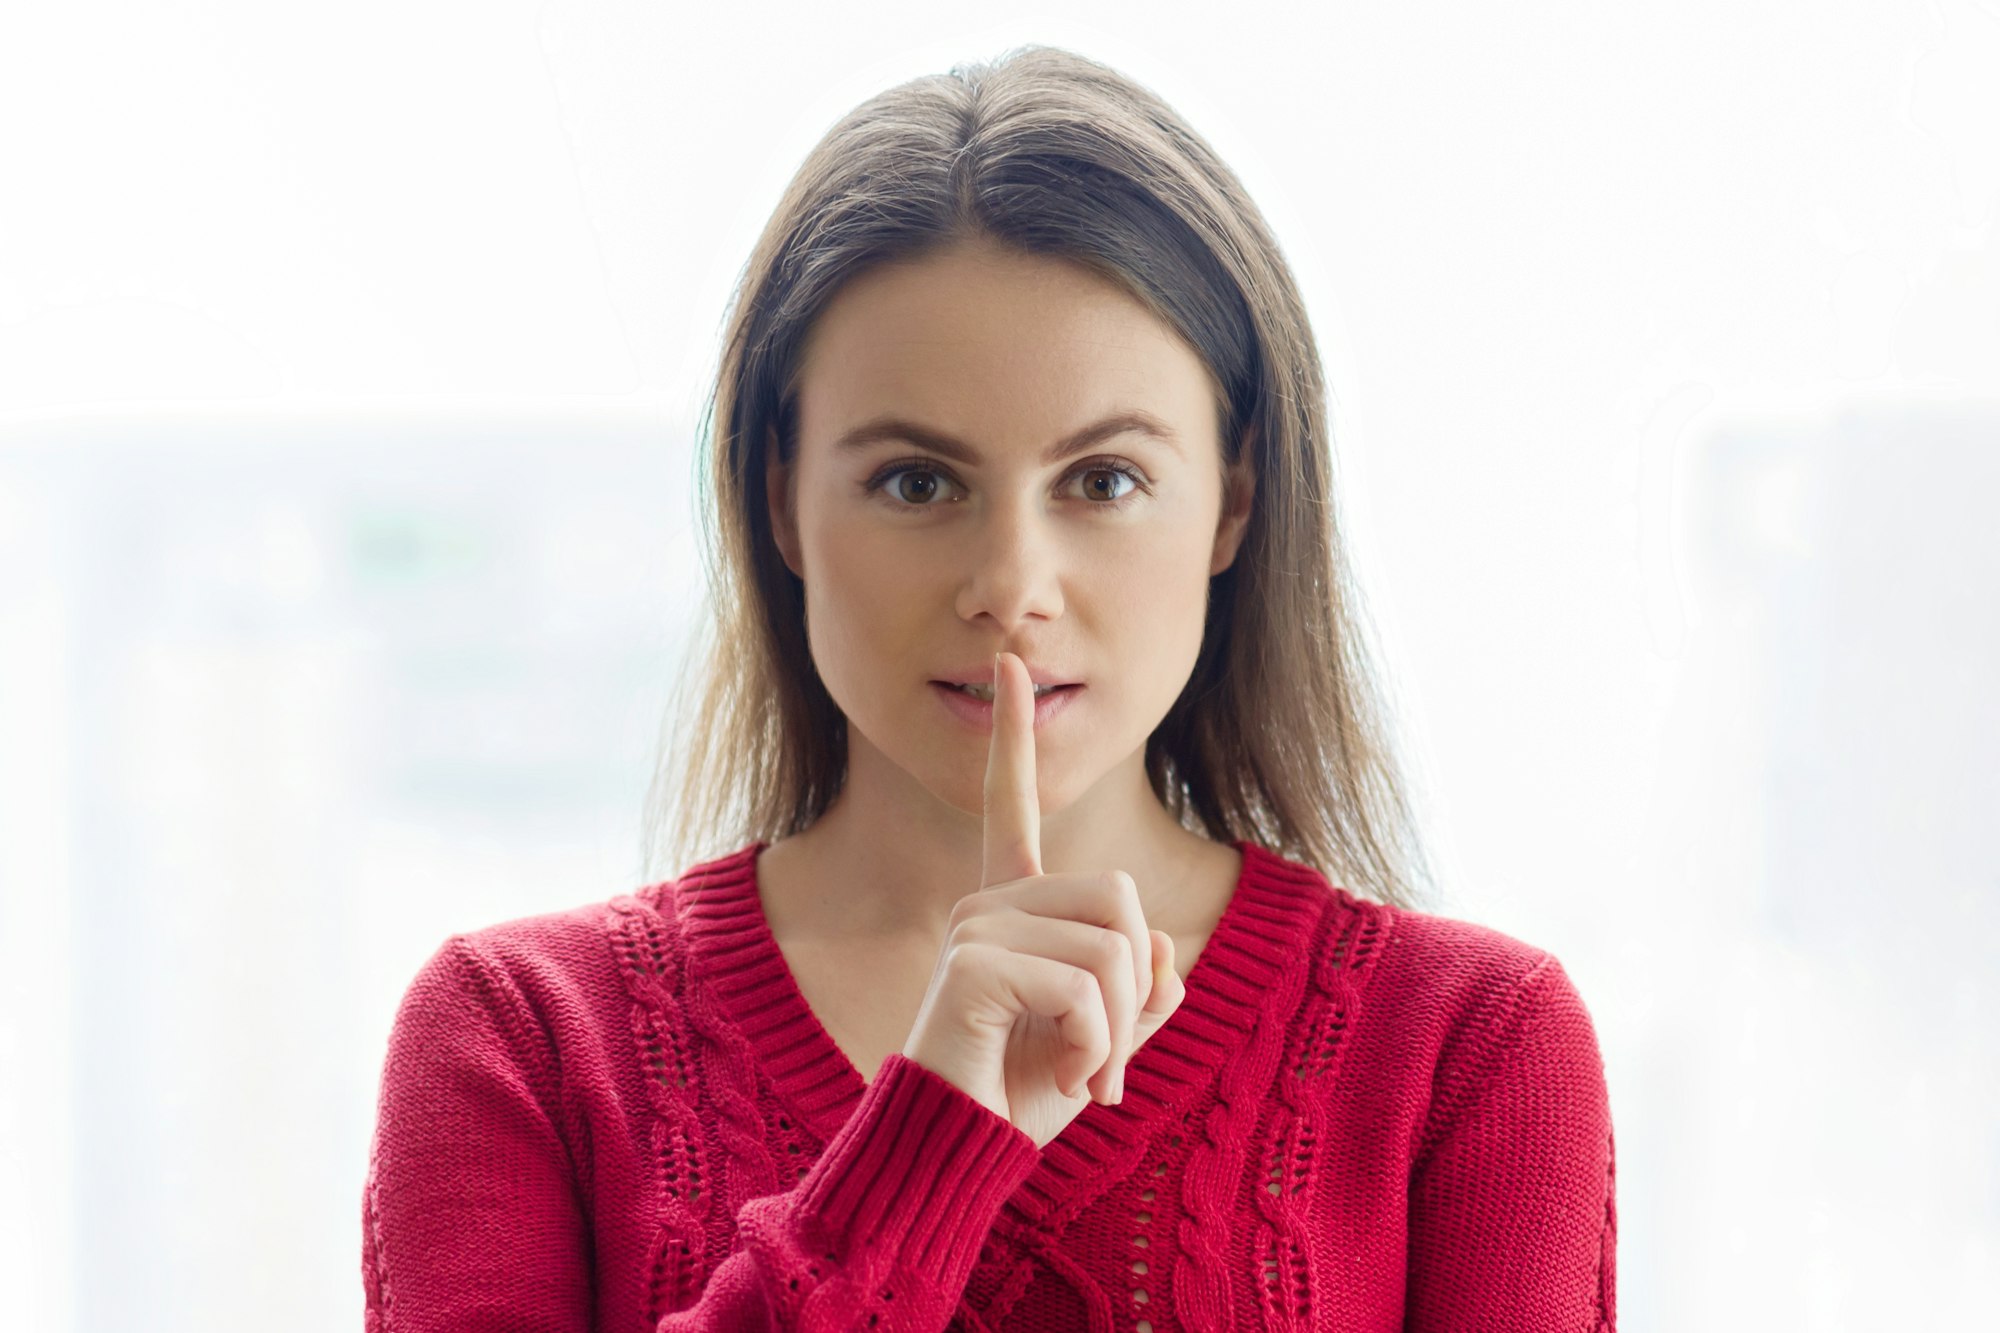 Sign secret, young woman showing silence sign with her finger on lips